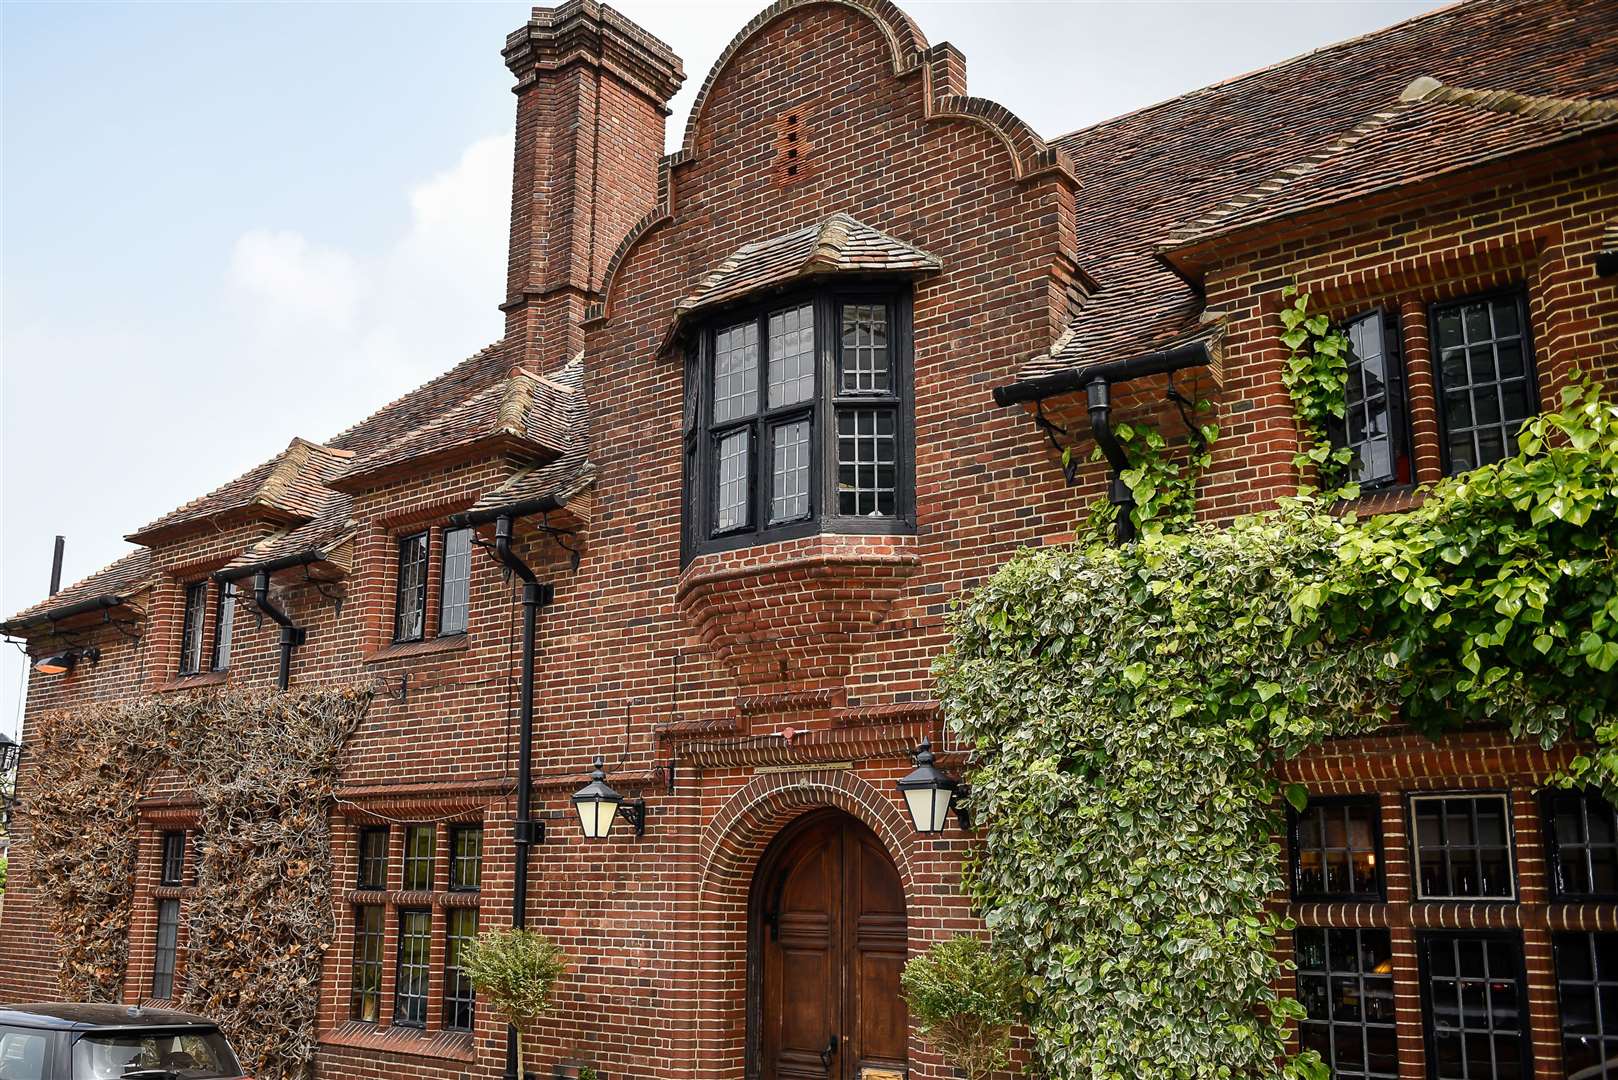 The Fordwich Arms in Canterbury was ranked in the top 10